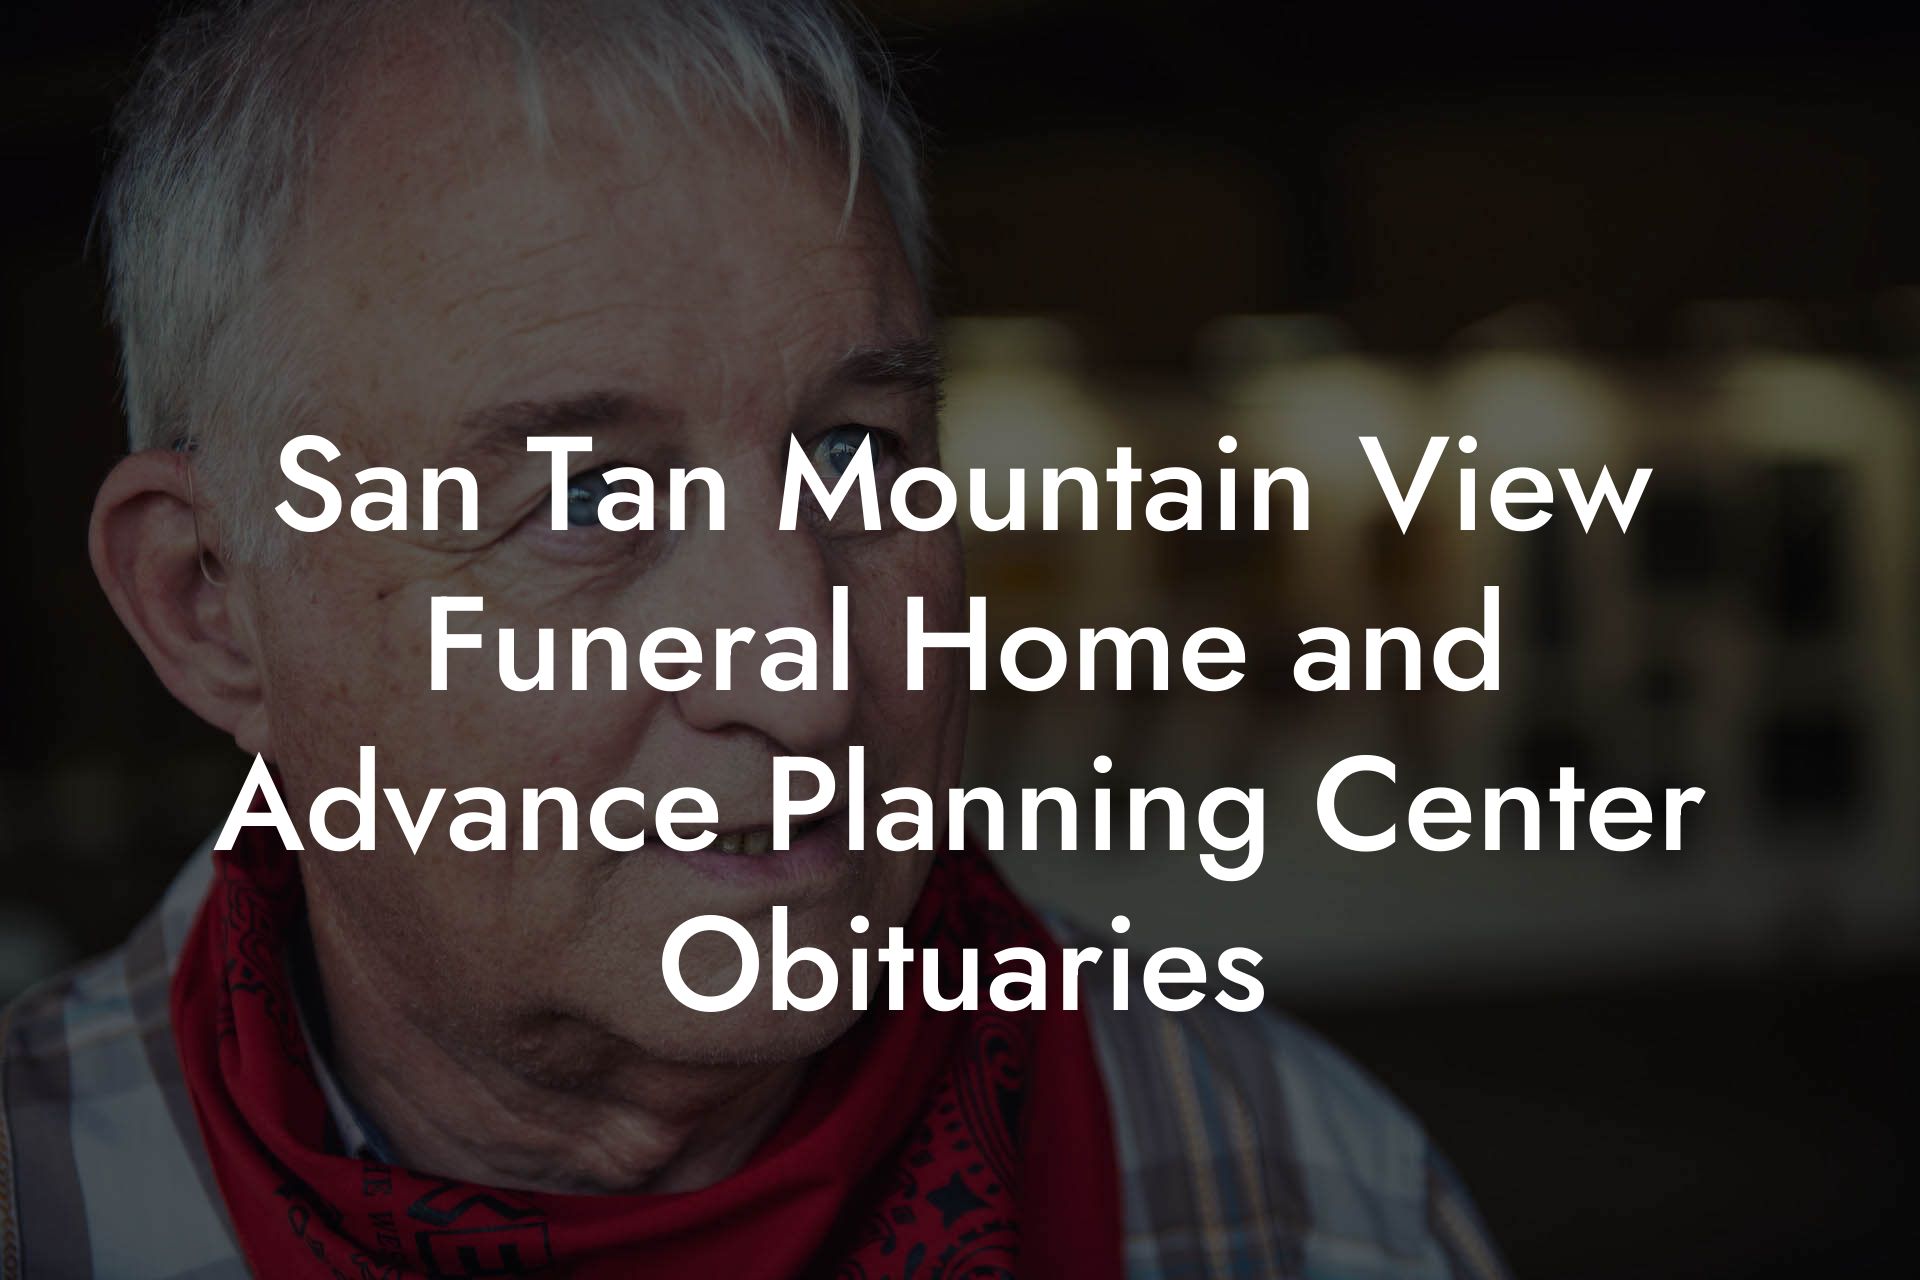 San Tan Mountain View Funeral Home and Advance Planning Center Obituaries